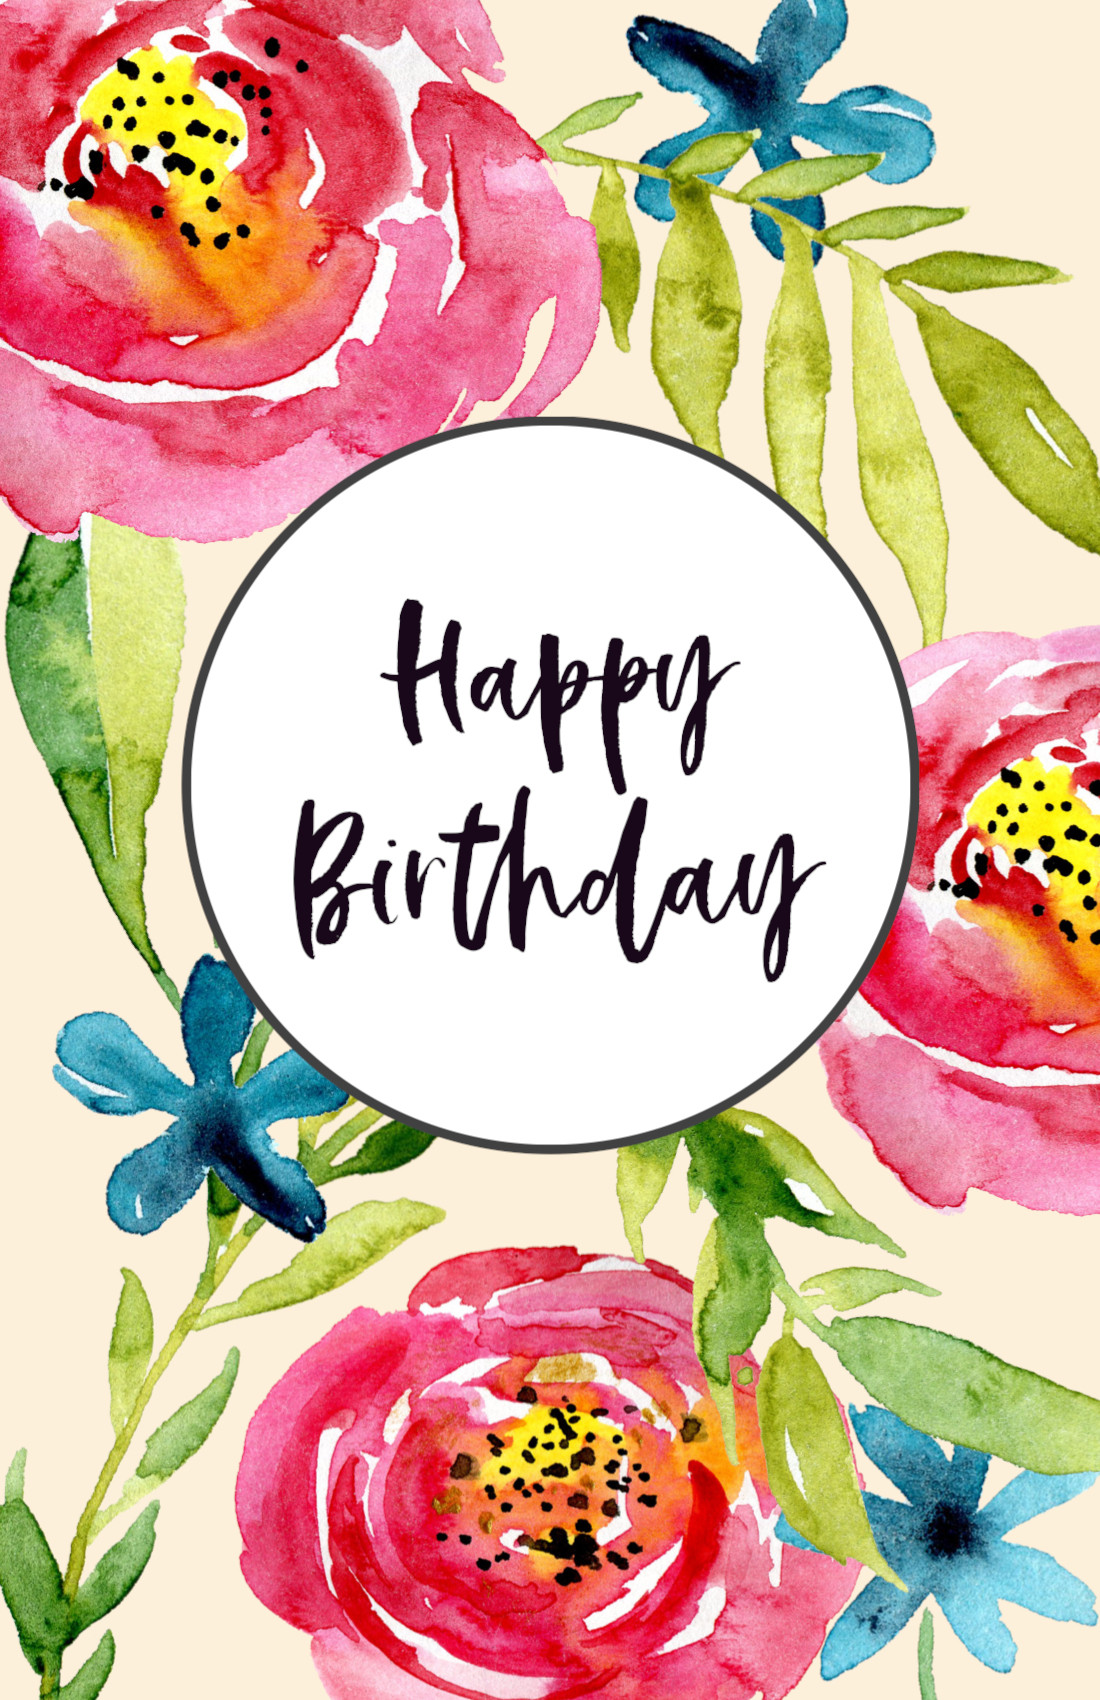 Birthday Cards To Print Out
 Free Printable Birthday Cards Paper Trail Design